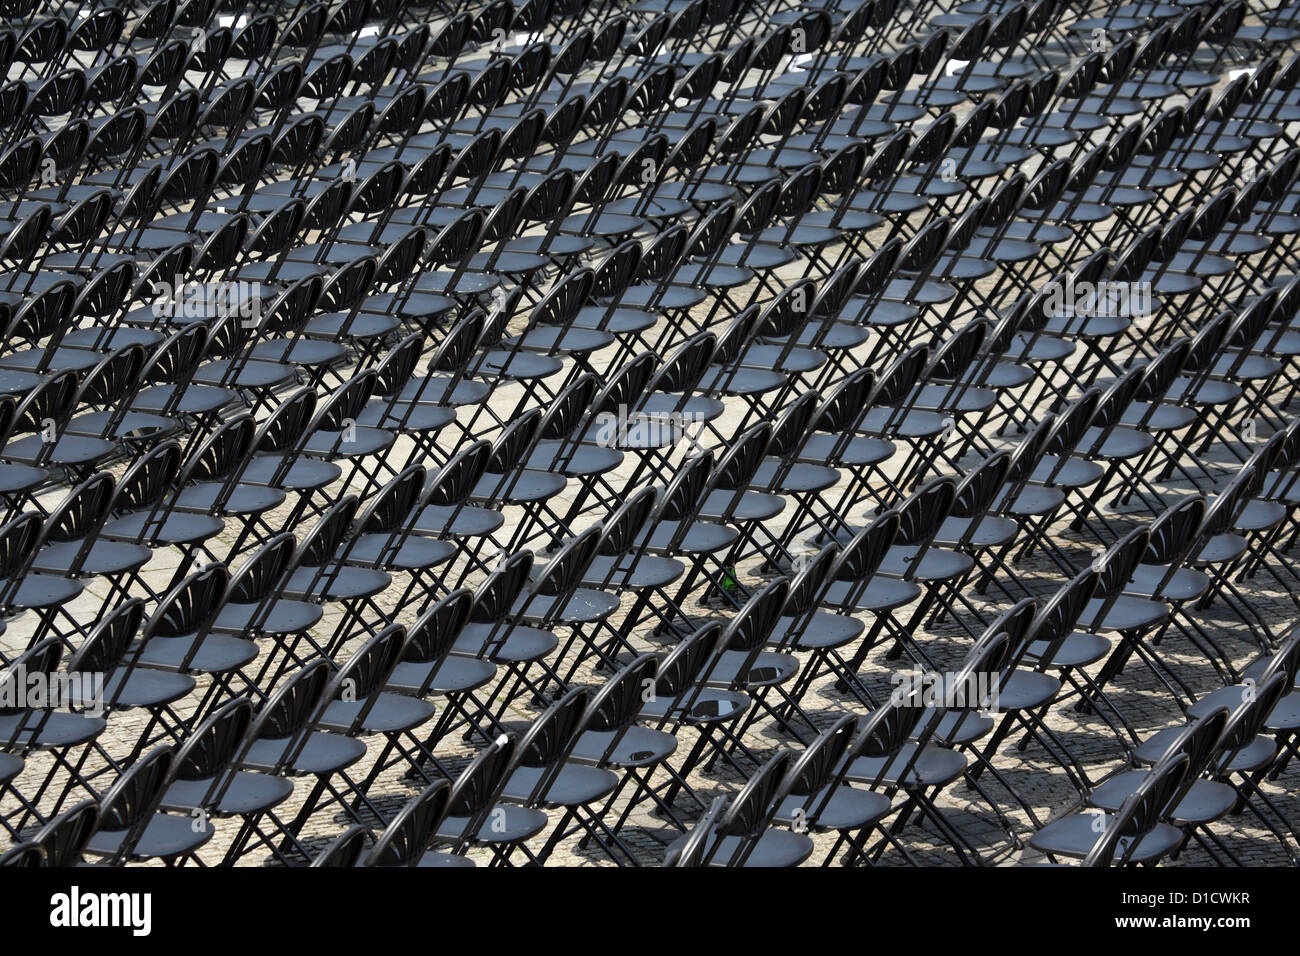 Berlin, Germany, empty rows of chairs Stock Photo